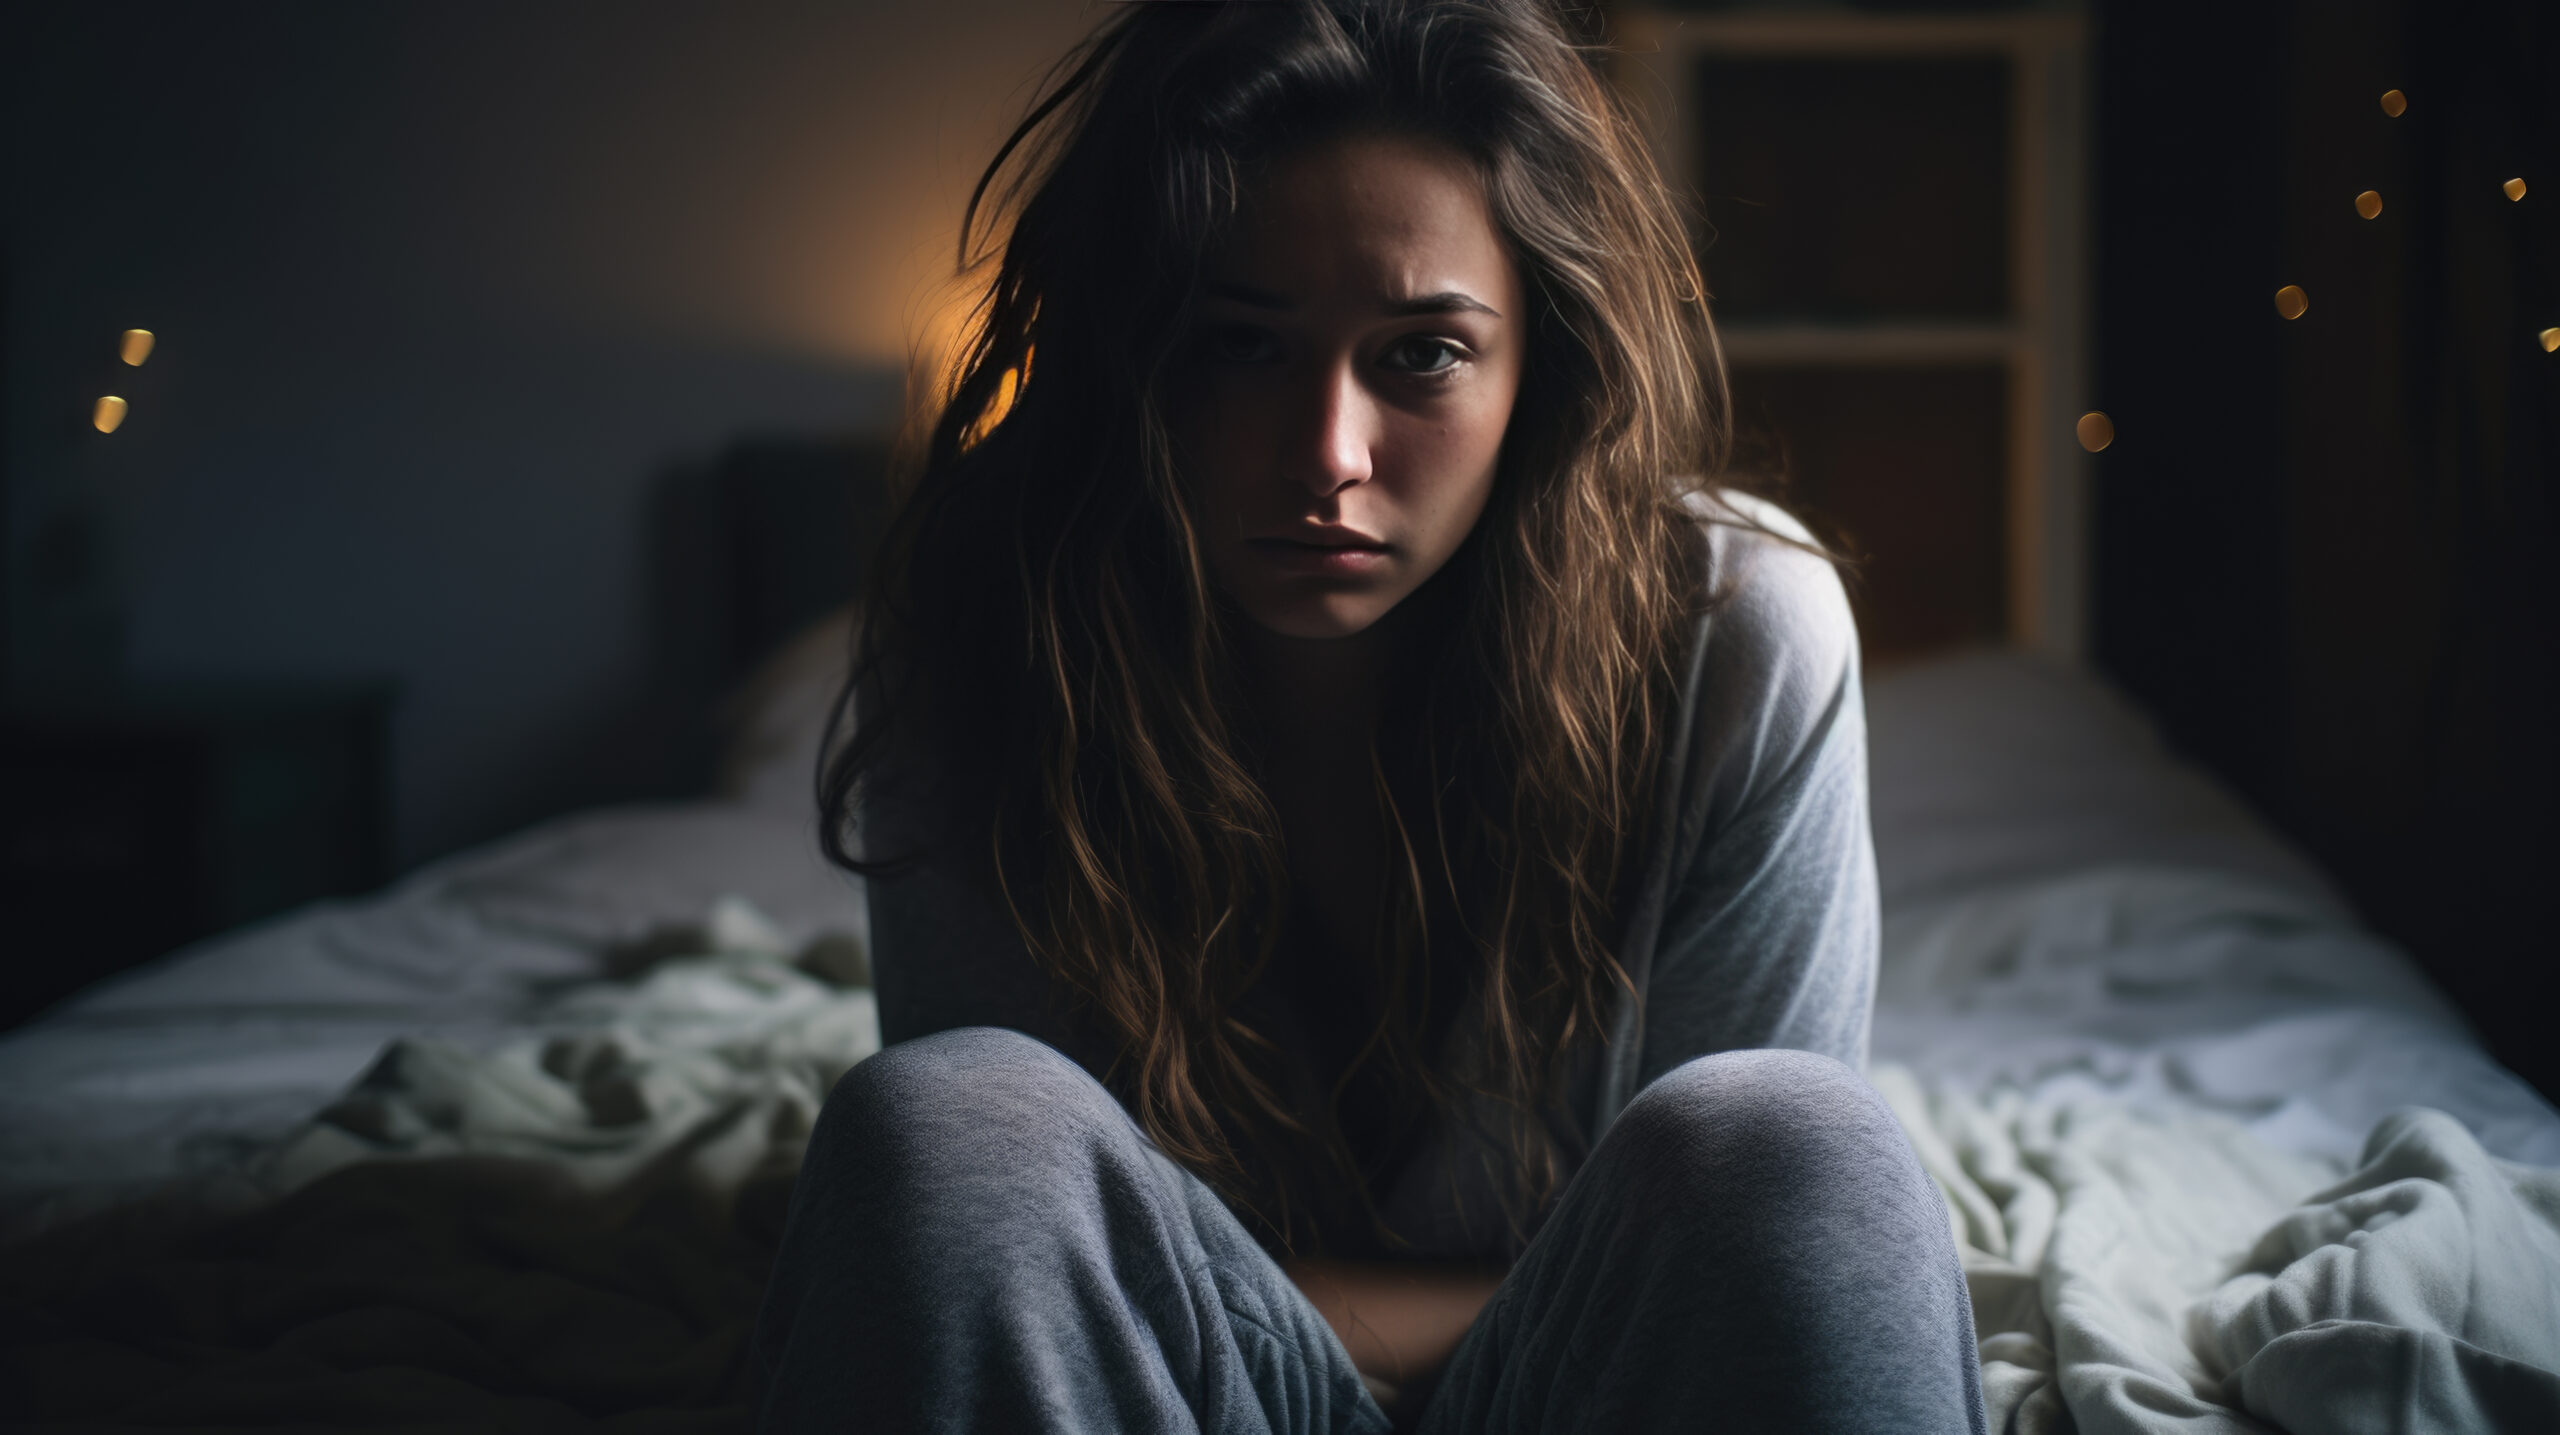 Upset young woman holding stomach while seated on the edge of the bed